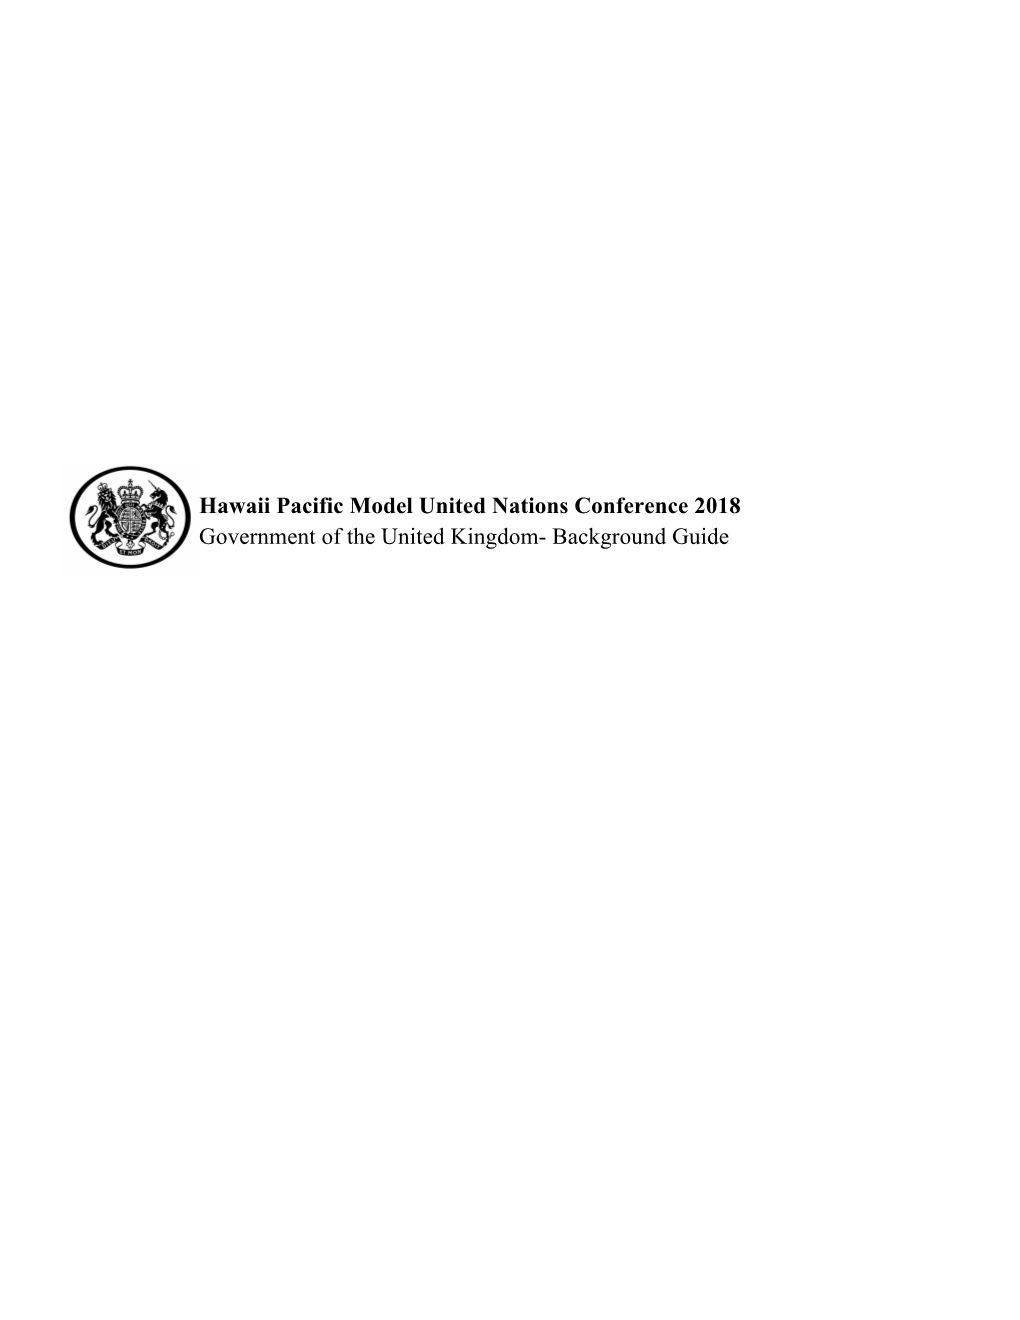 Hawaii Pacific Model United Nations Conference 2018 Government of the United Kingdom- Background Guide